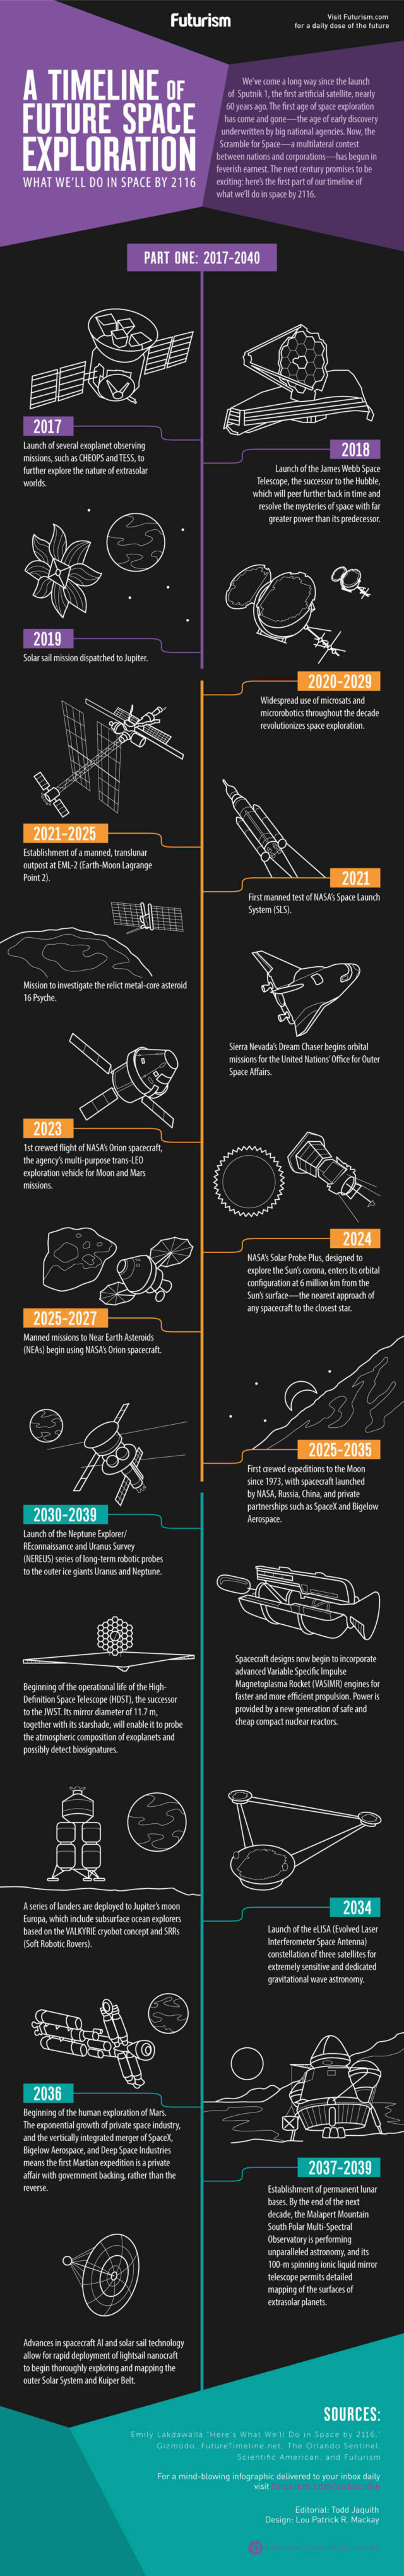 A Timeline of Future Space Exploration